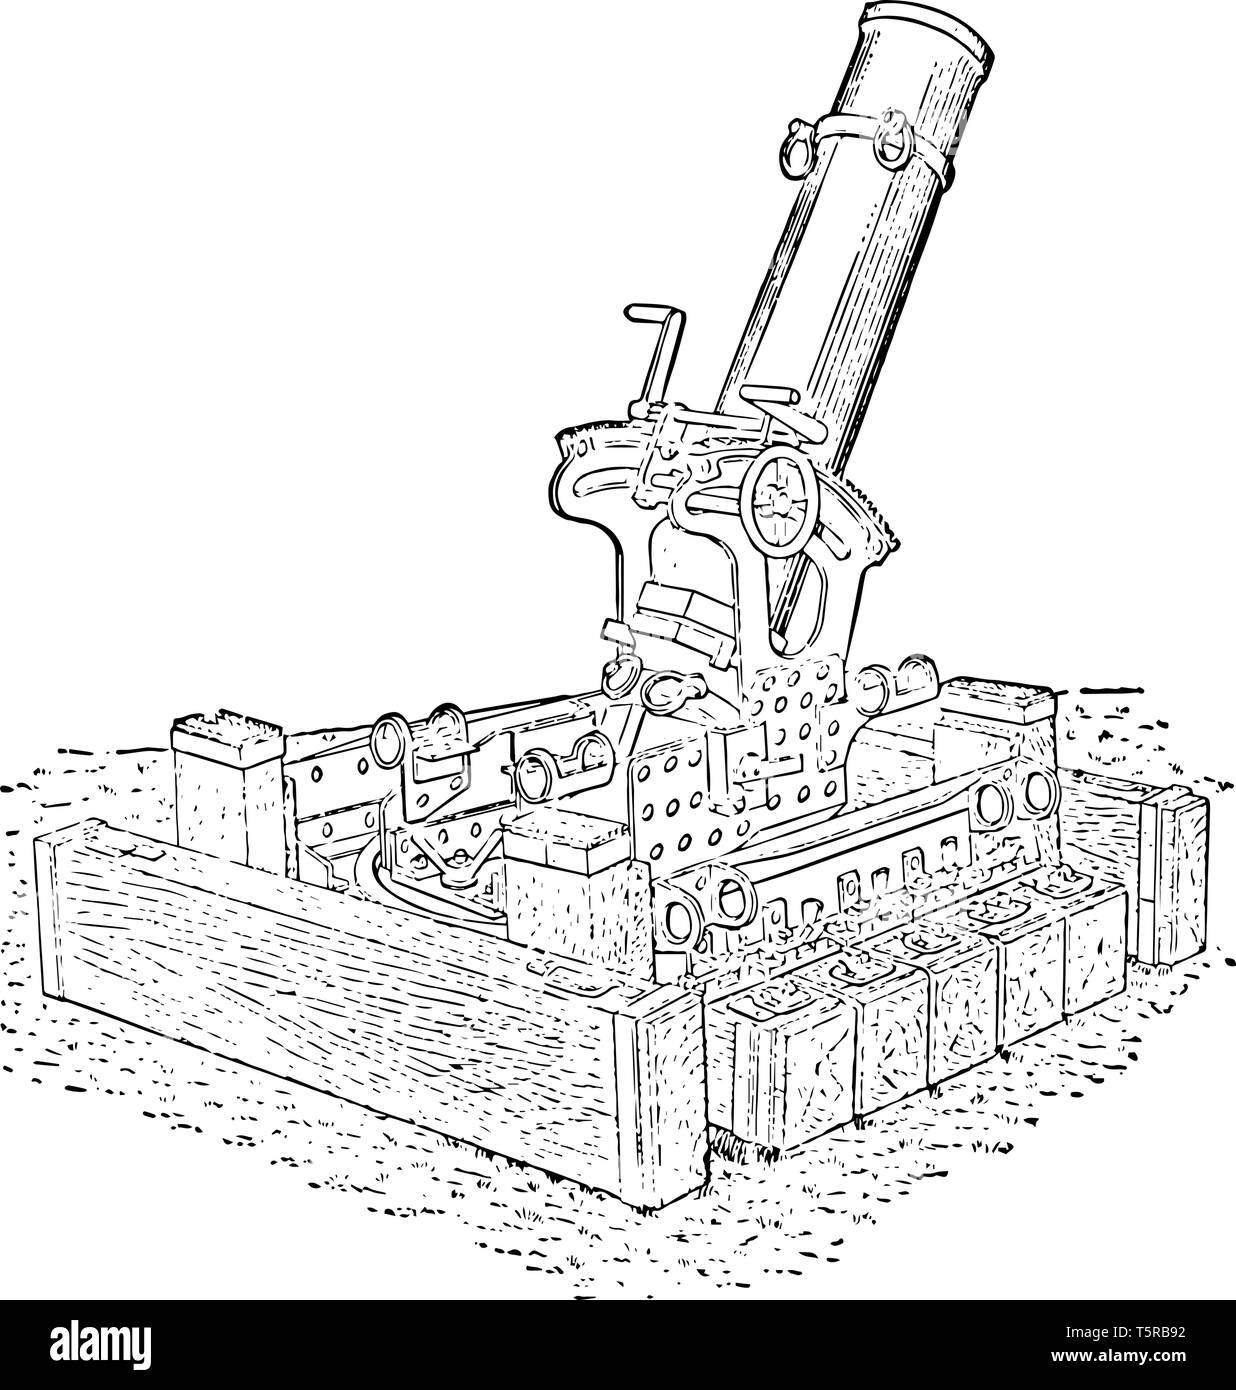 240 mm Trench Mortar used by the French during World War I, vintage line drawing or engraving illustration. Stock Vector